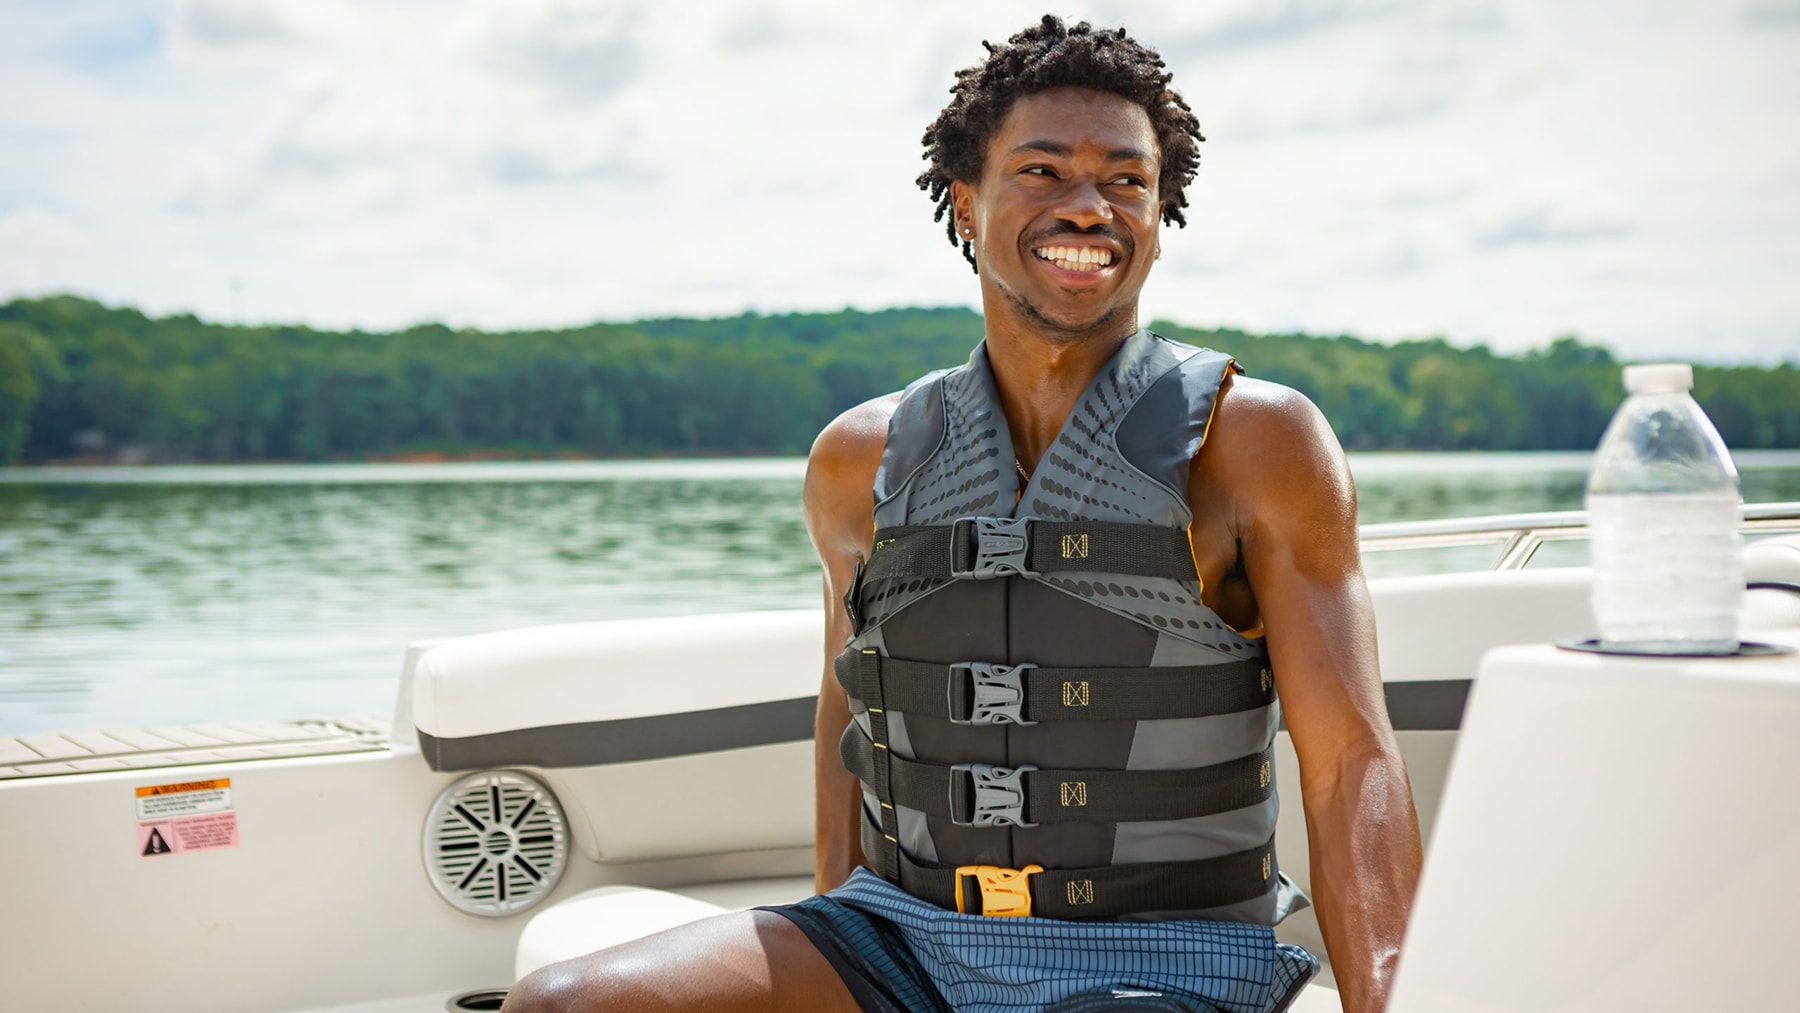 Young Black man on boat wearing a life jacket.